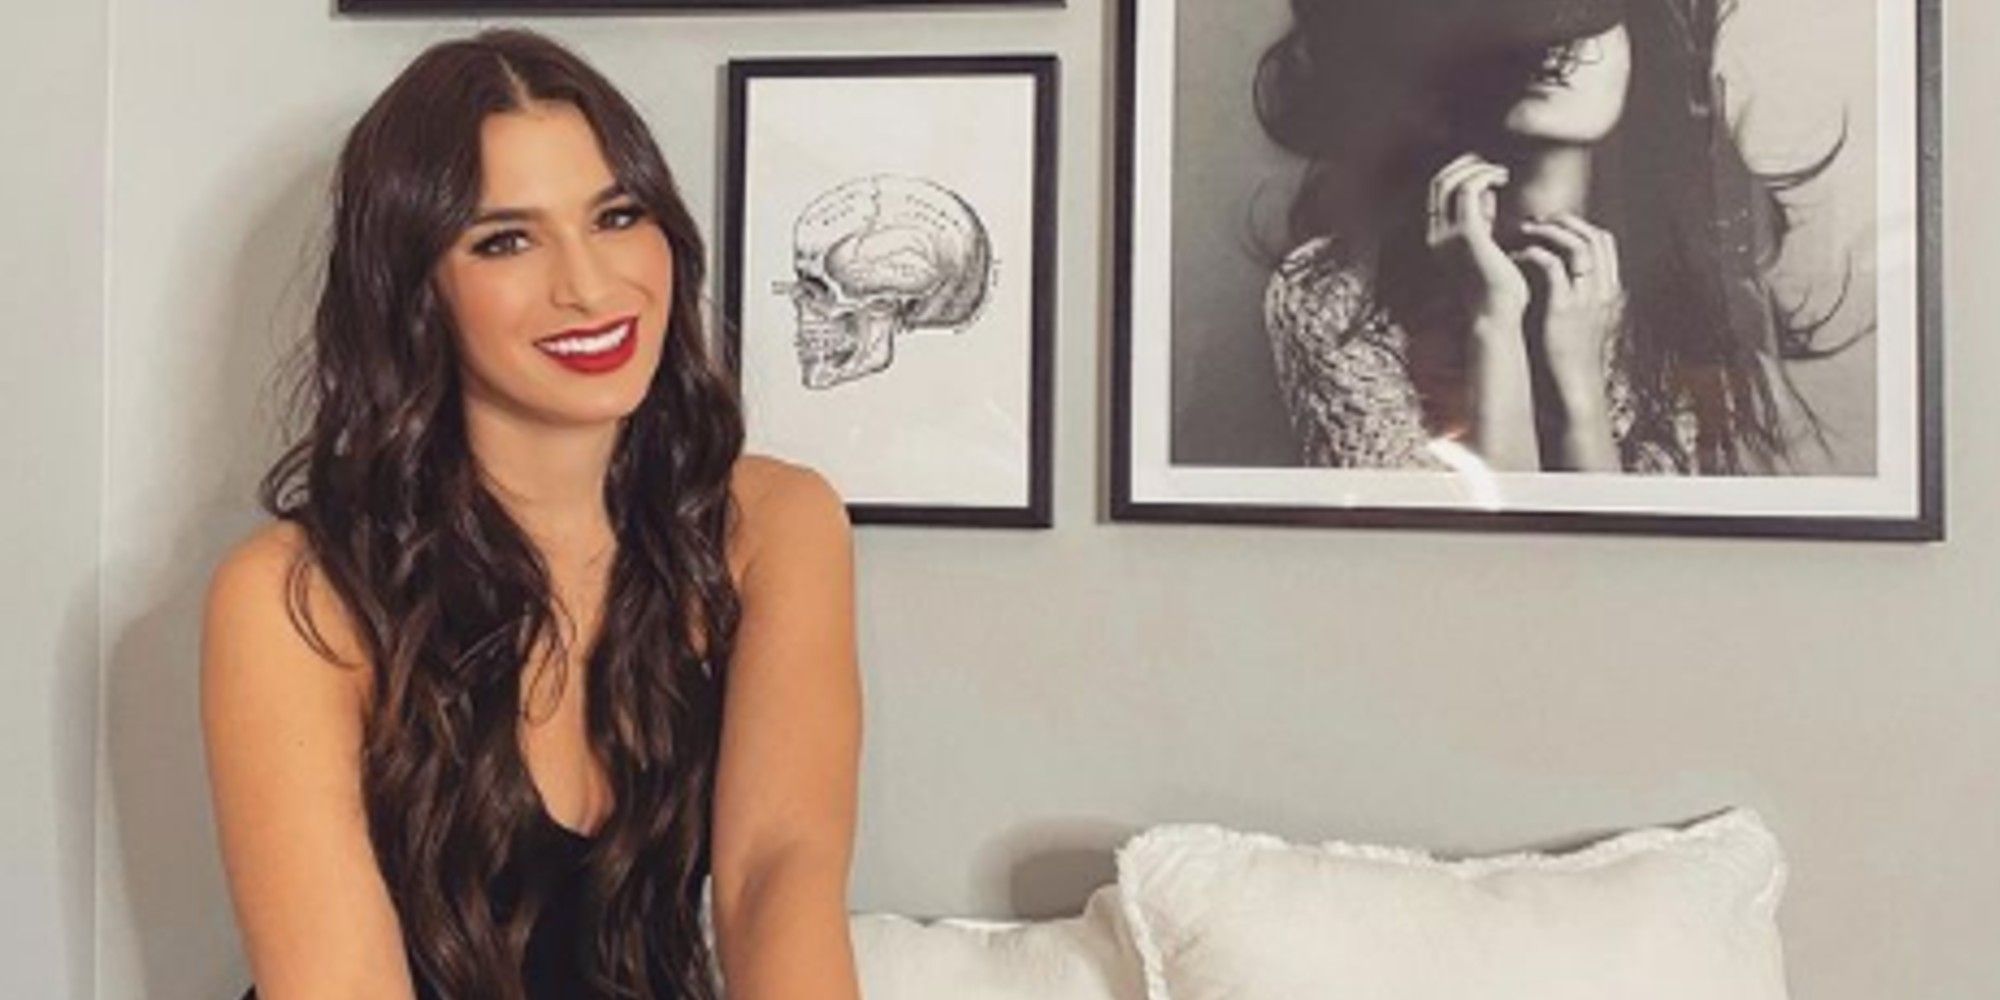 Bachelor Why Ashley Iaconetti Had A Problem With Victoria While Filming